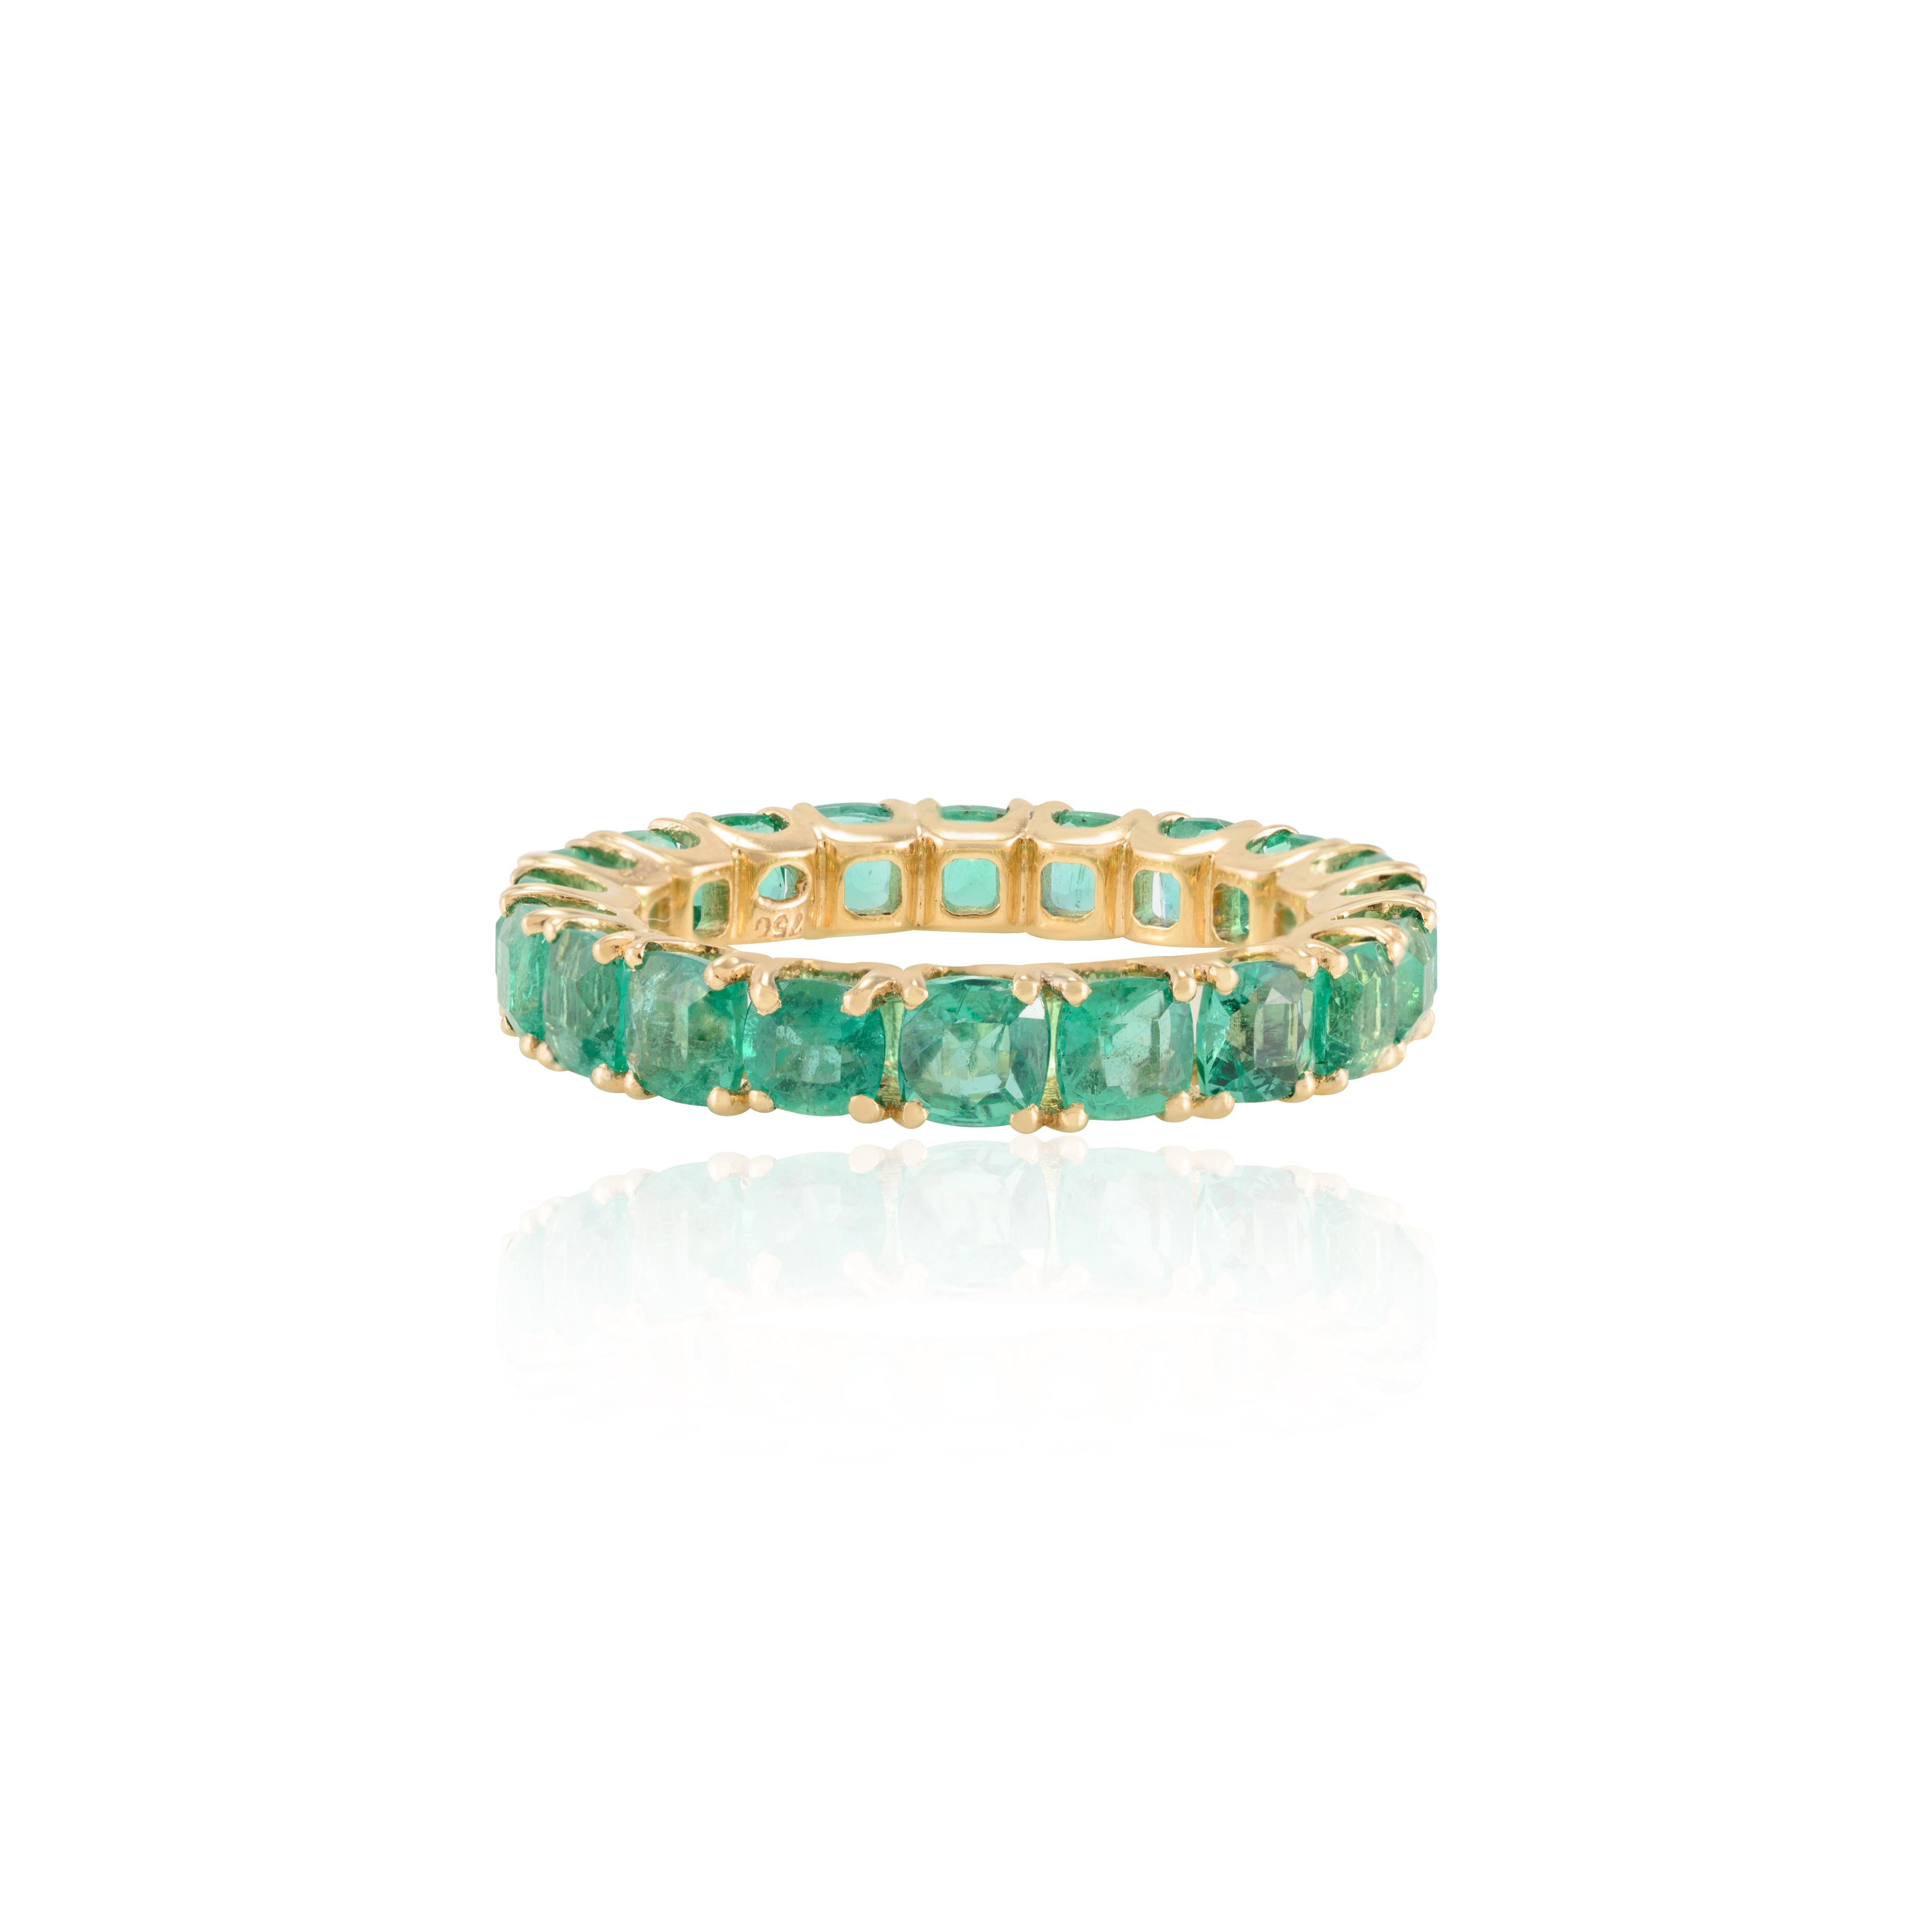 For Sale:  18k Solid Yellow Gold 4.06 CTW Cushion Emerald Eternity Band Ring 3